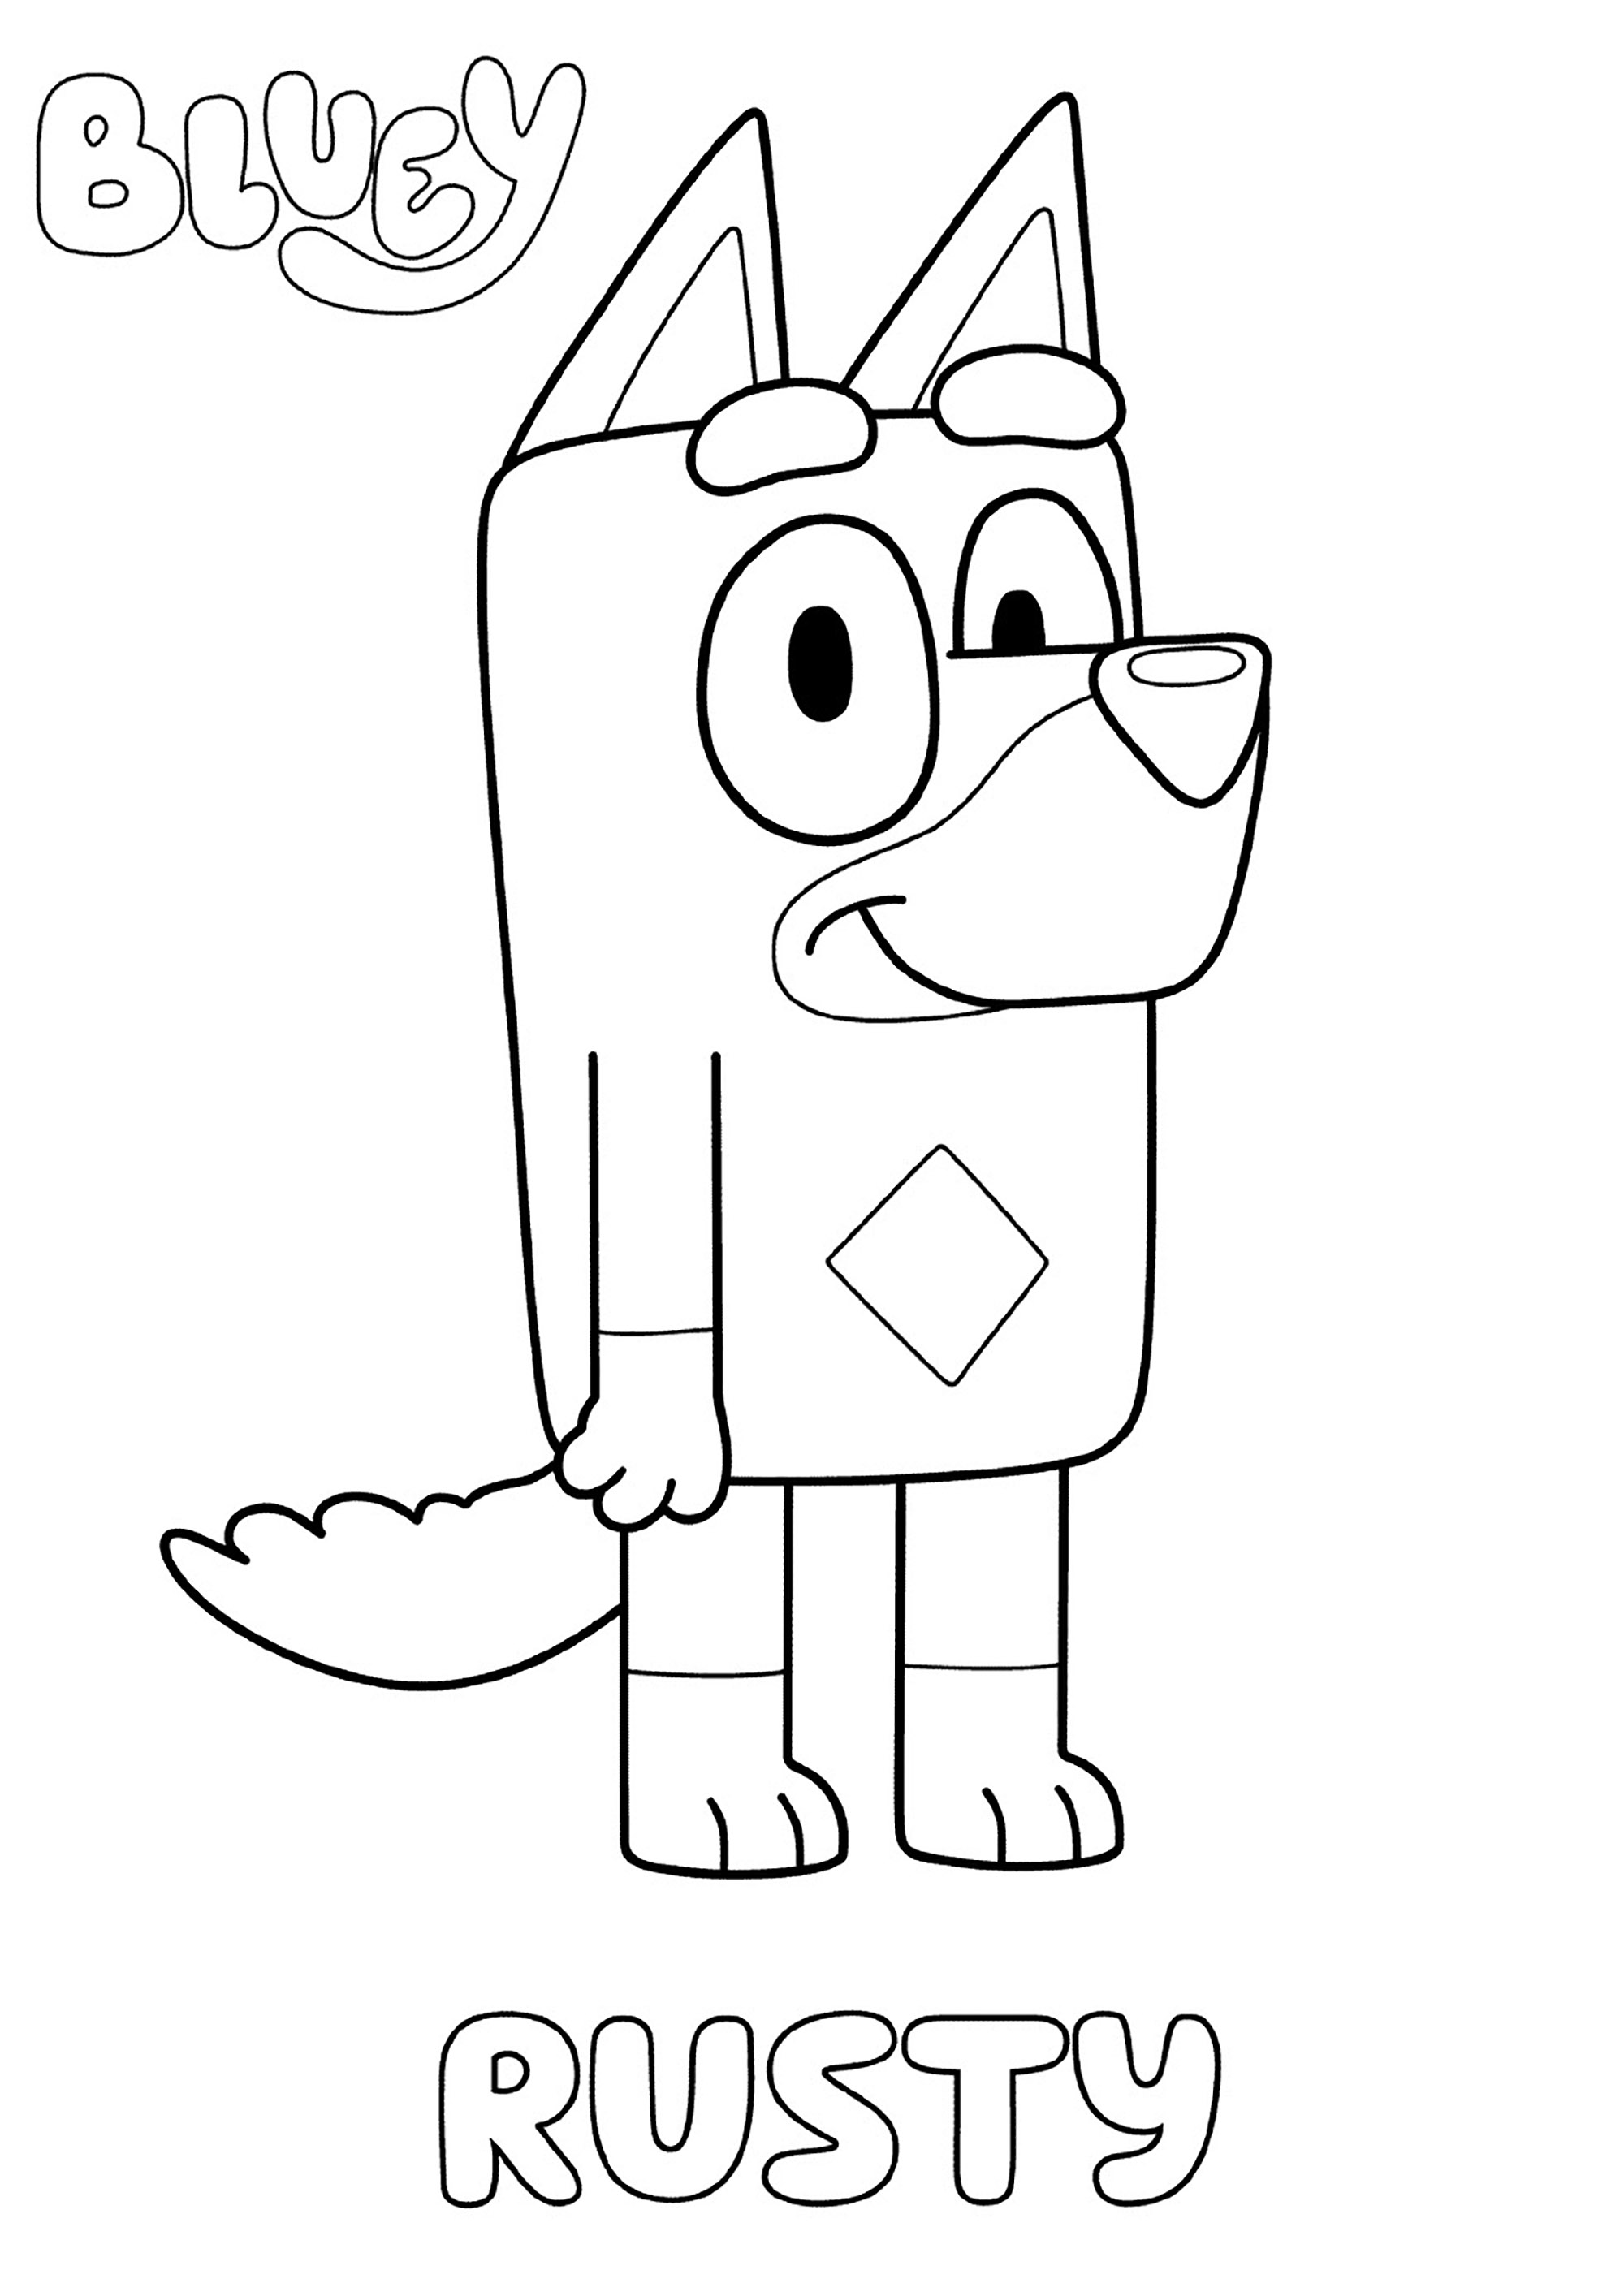 Bluey coloring page: Rusty